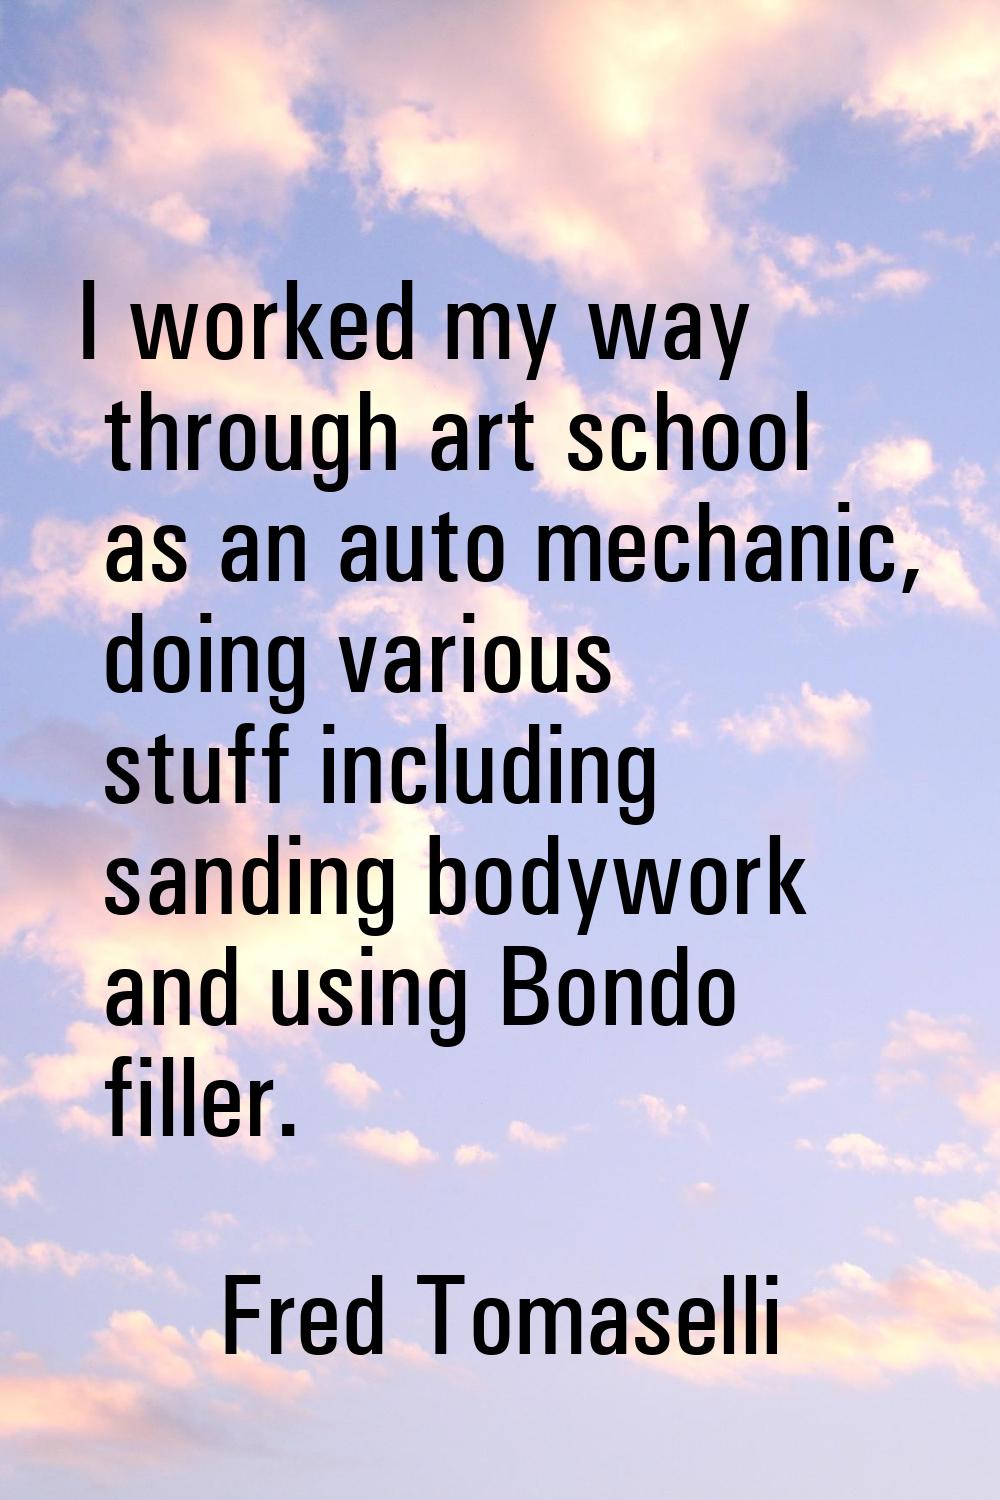 I worked my way through art school as an auto mechanic, doing various stuff including sanding bodyw